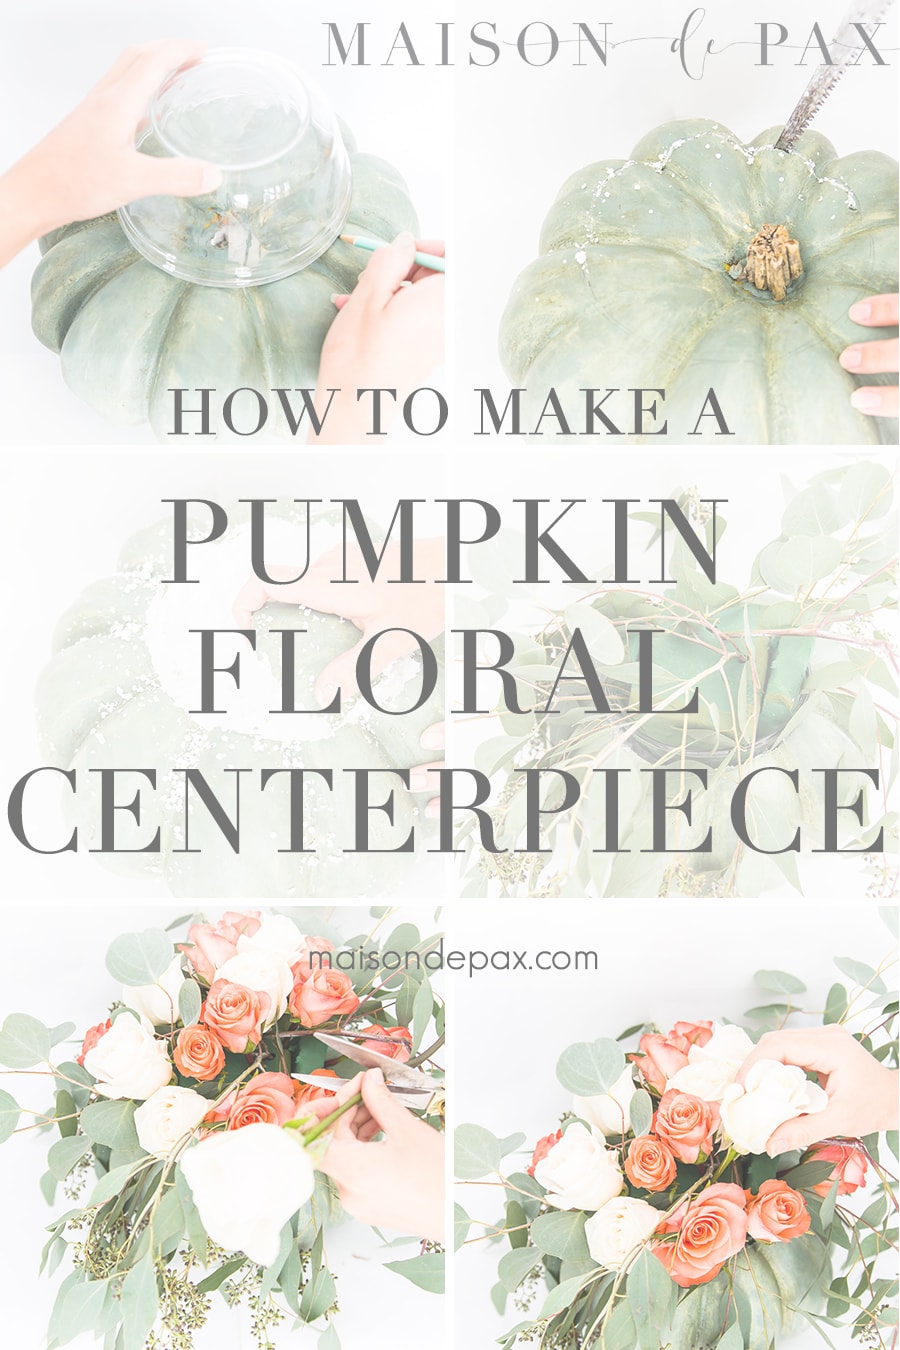 tutorial images and text that reads "how to make a pumpkin floral centerpiece"